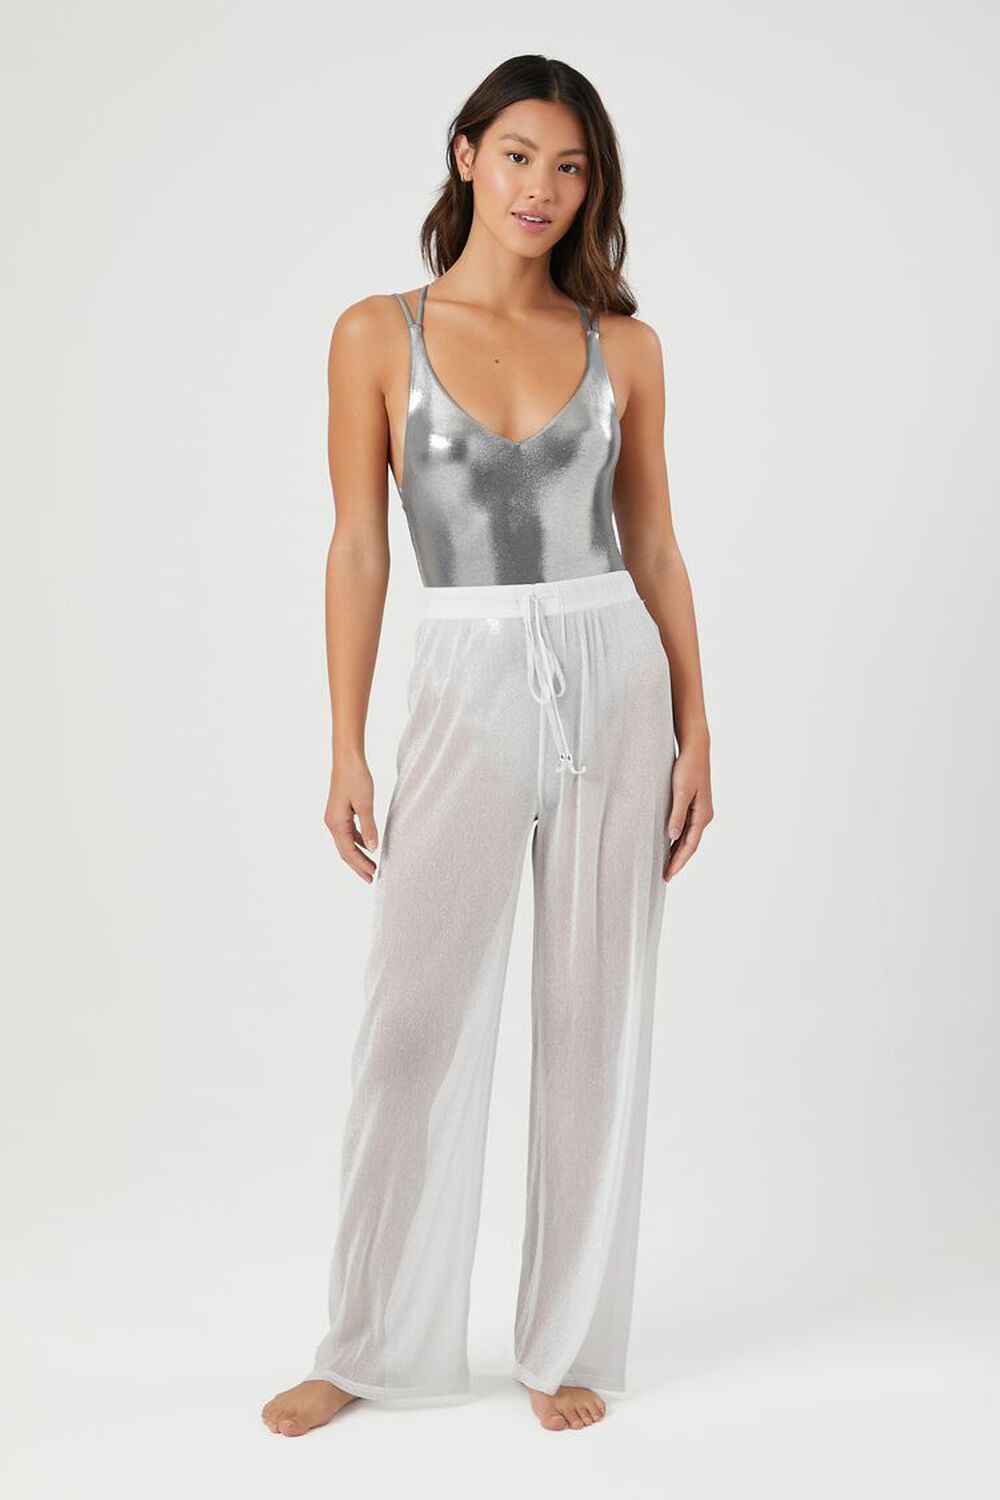 SILVER Sheer Glitter Swim Cover-Up Pants, image 1